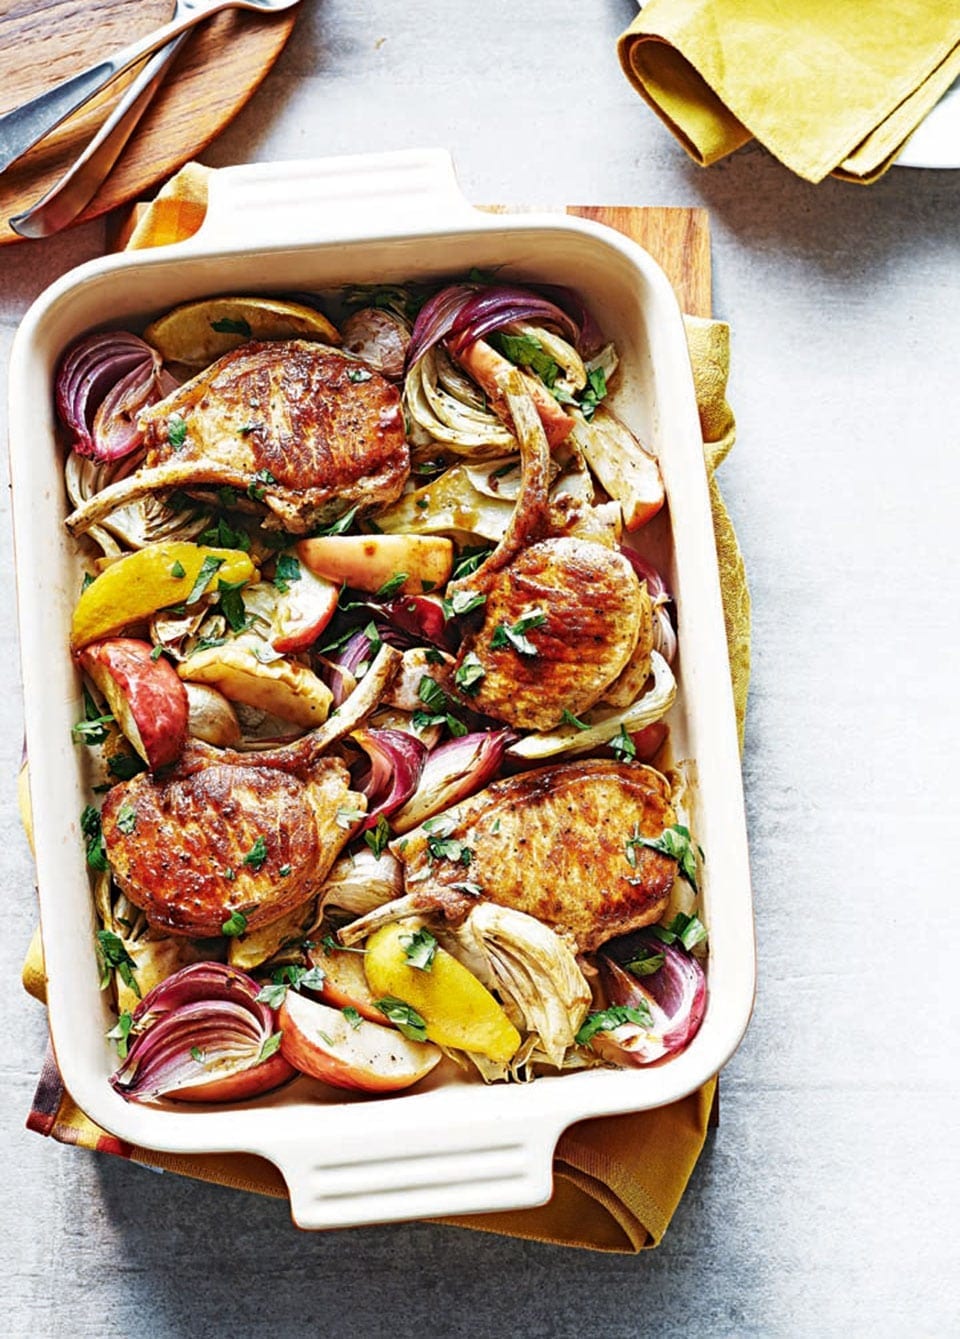 Cider-baked pork with apple and fennel recipe | delicious. magazine